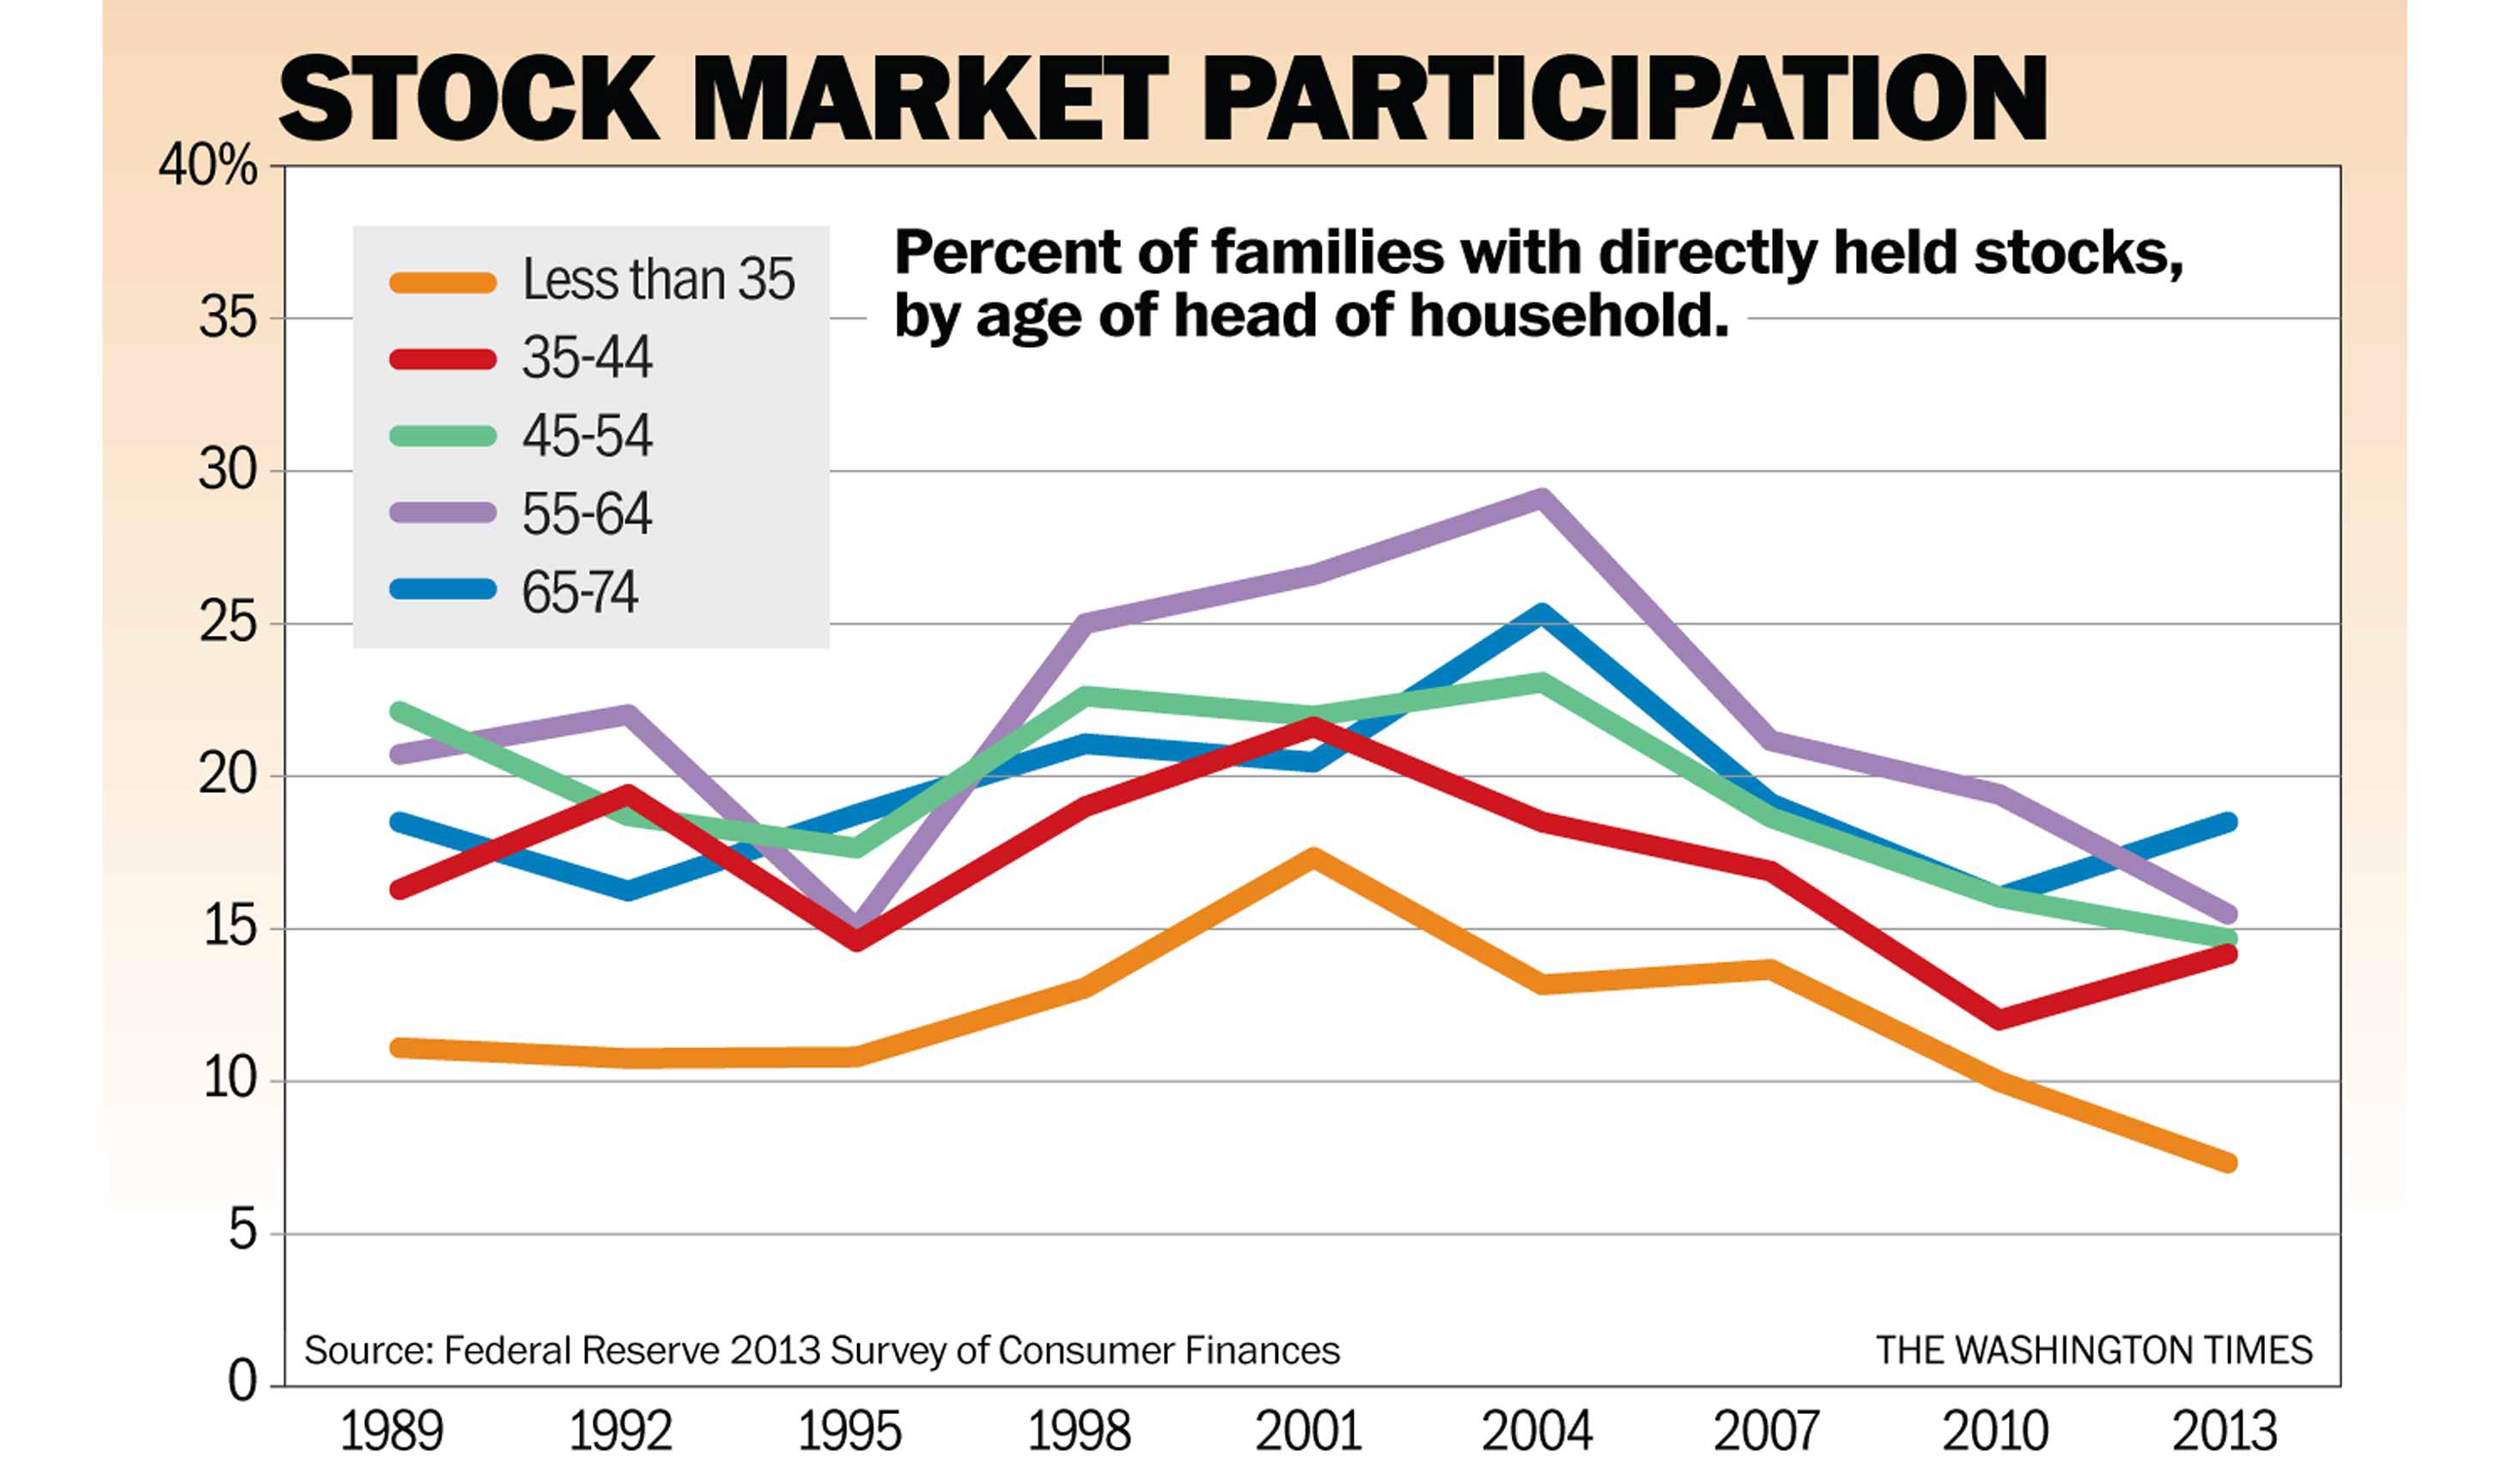 Stock Market Participation Rate Chart